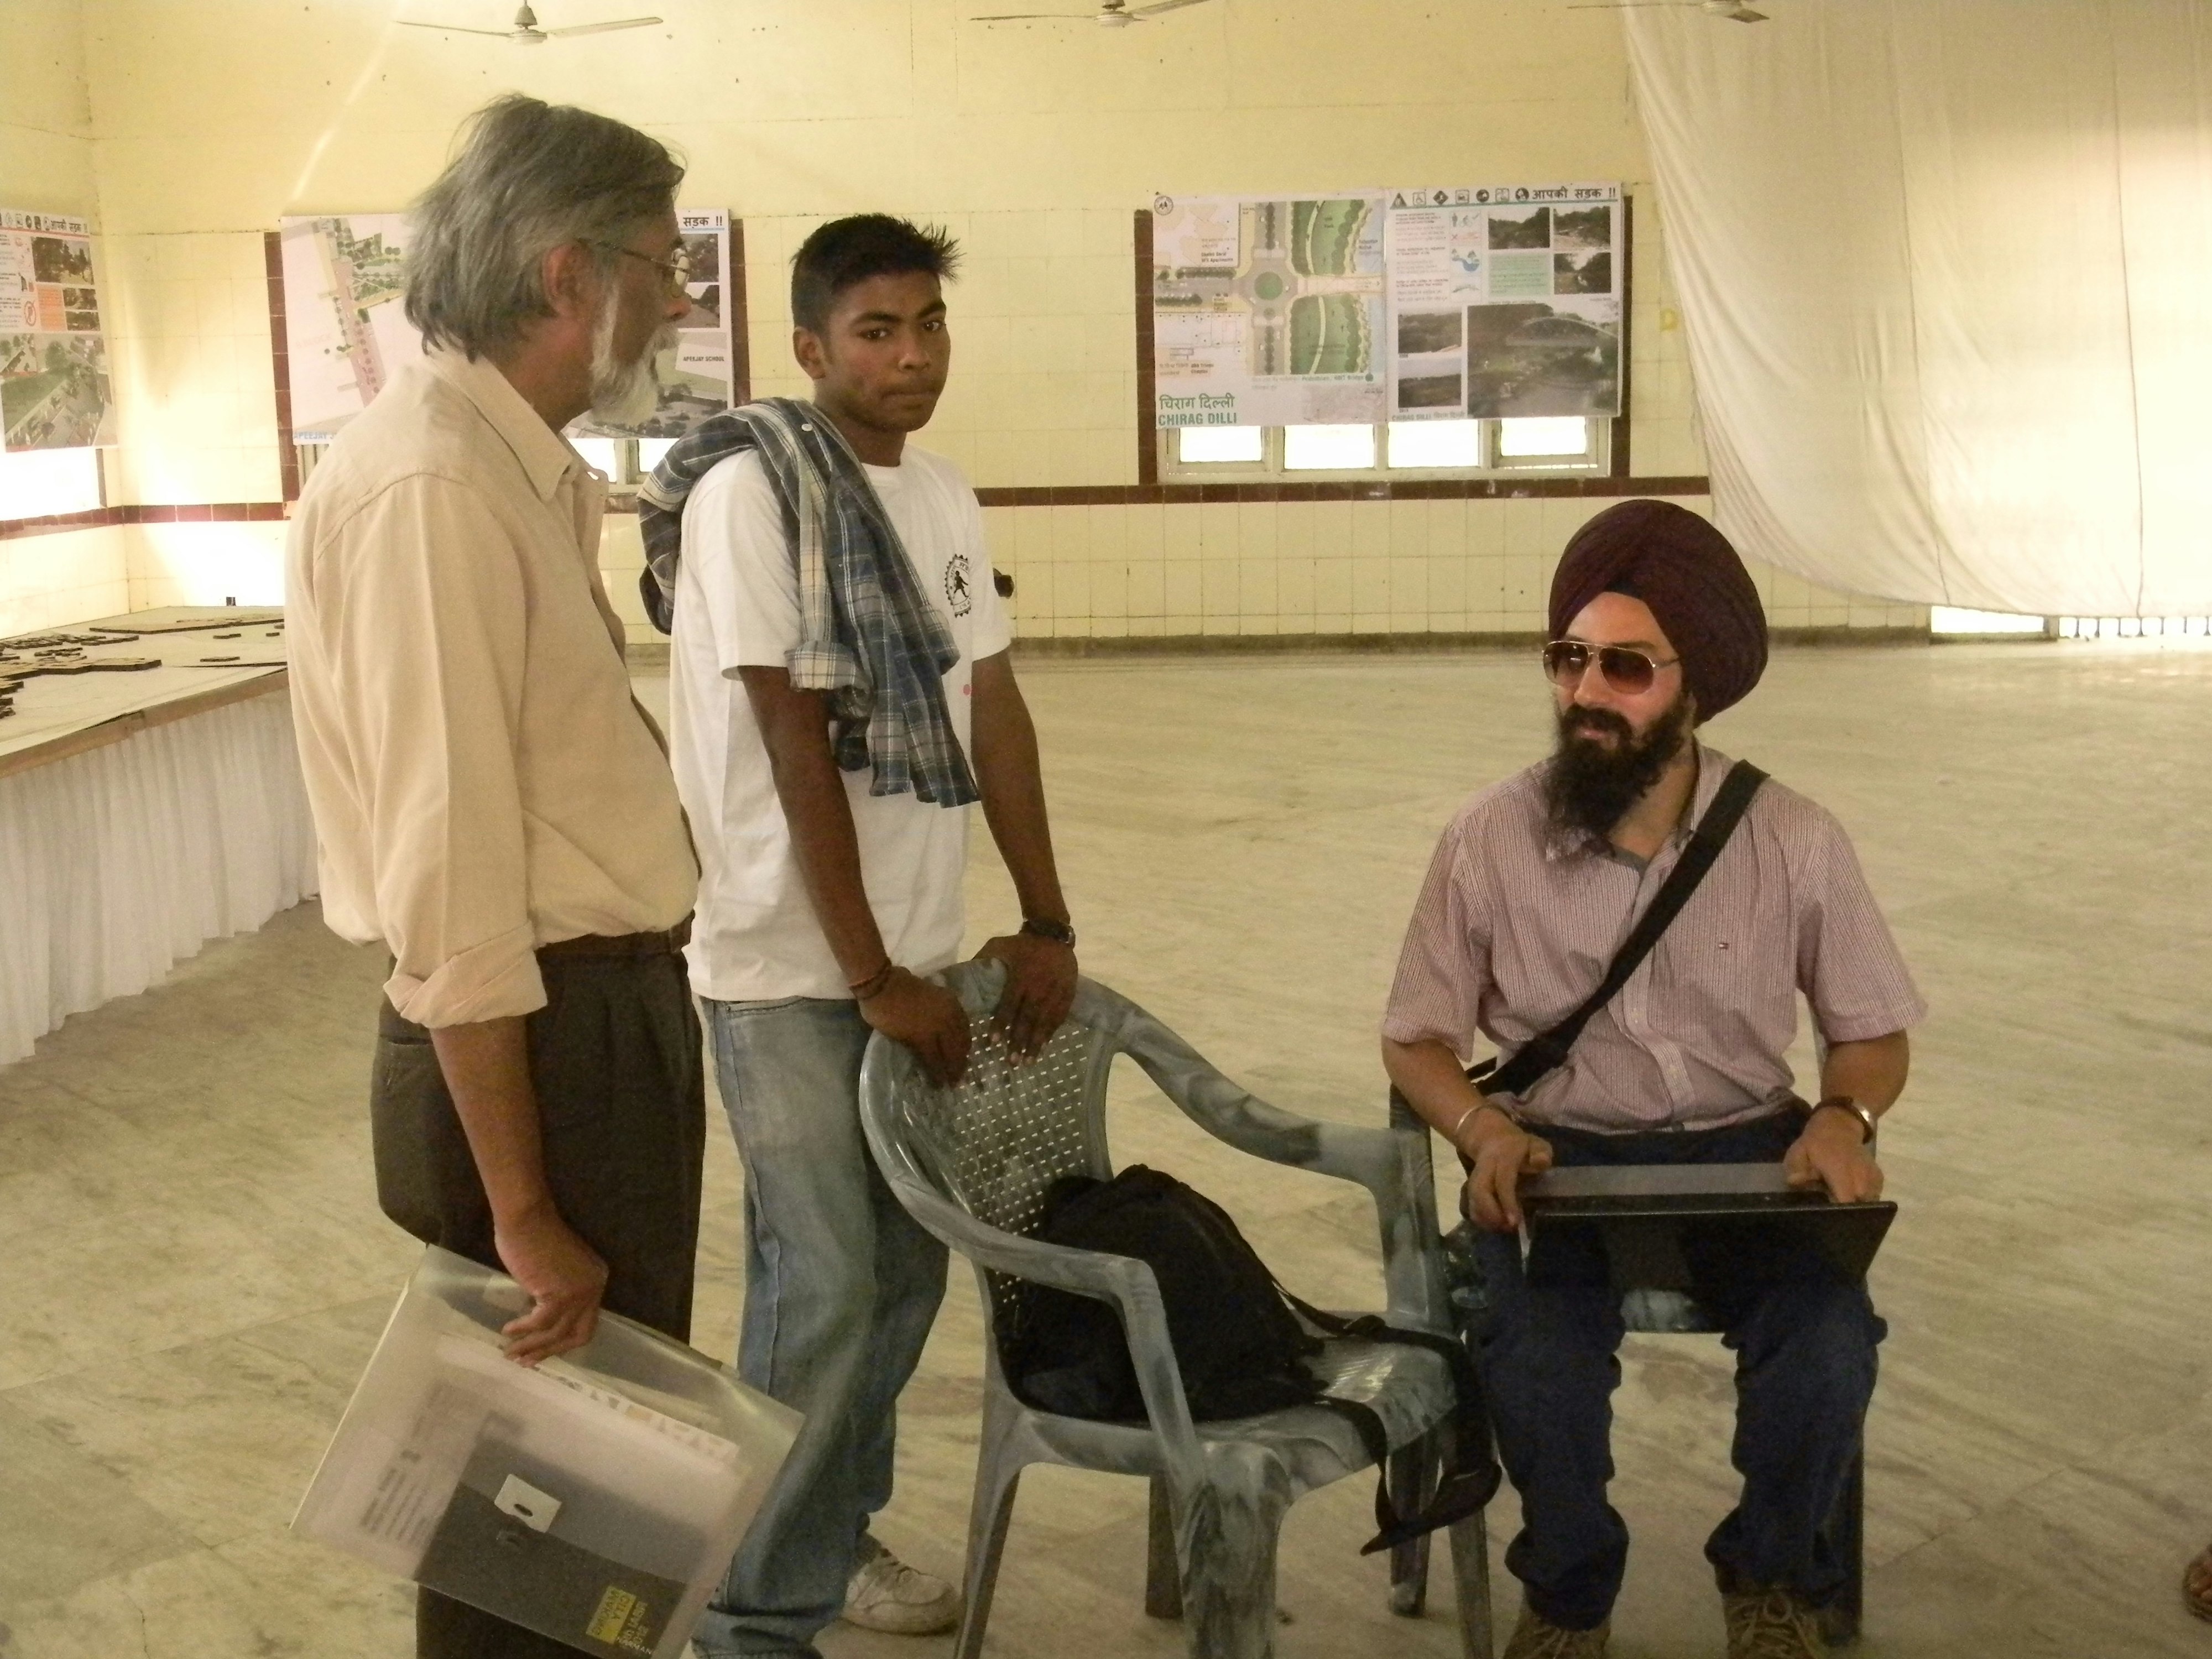 Three male-presenting figures stand in a room, speaking with each other. One of them has grey hair, wearing a dress shirt and trousers. The middle figure wears a white t-shirt and jeans. The third wears aviator sunglasses and a turban.